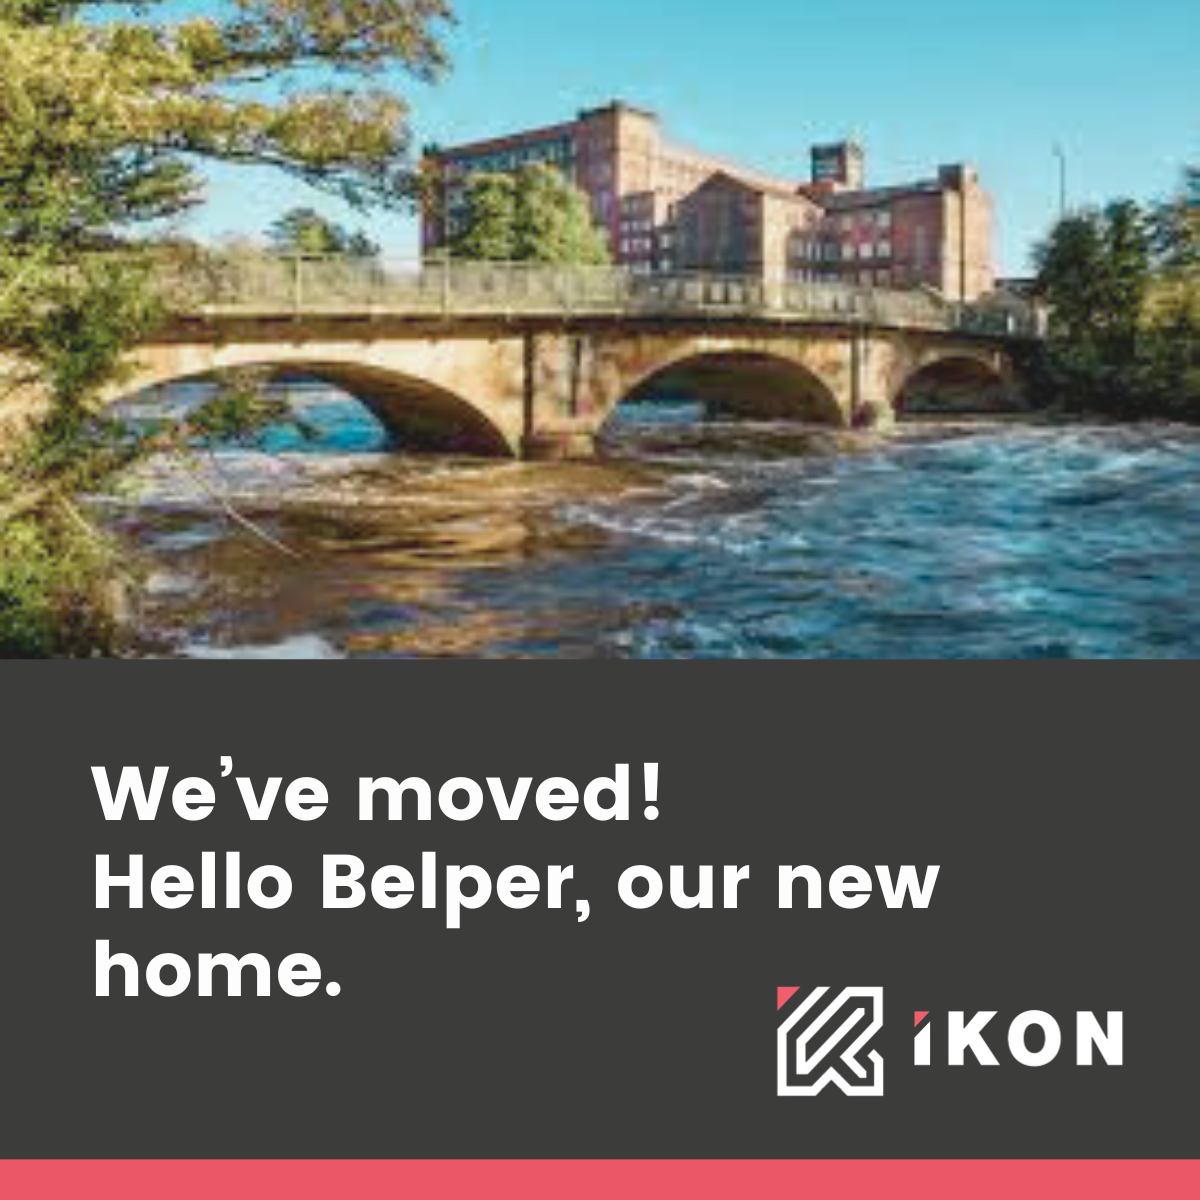 WE’VE MOVED! HELLO BELPER, OUR NEW HOME